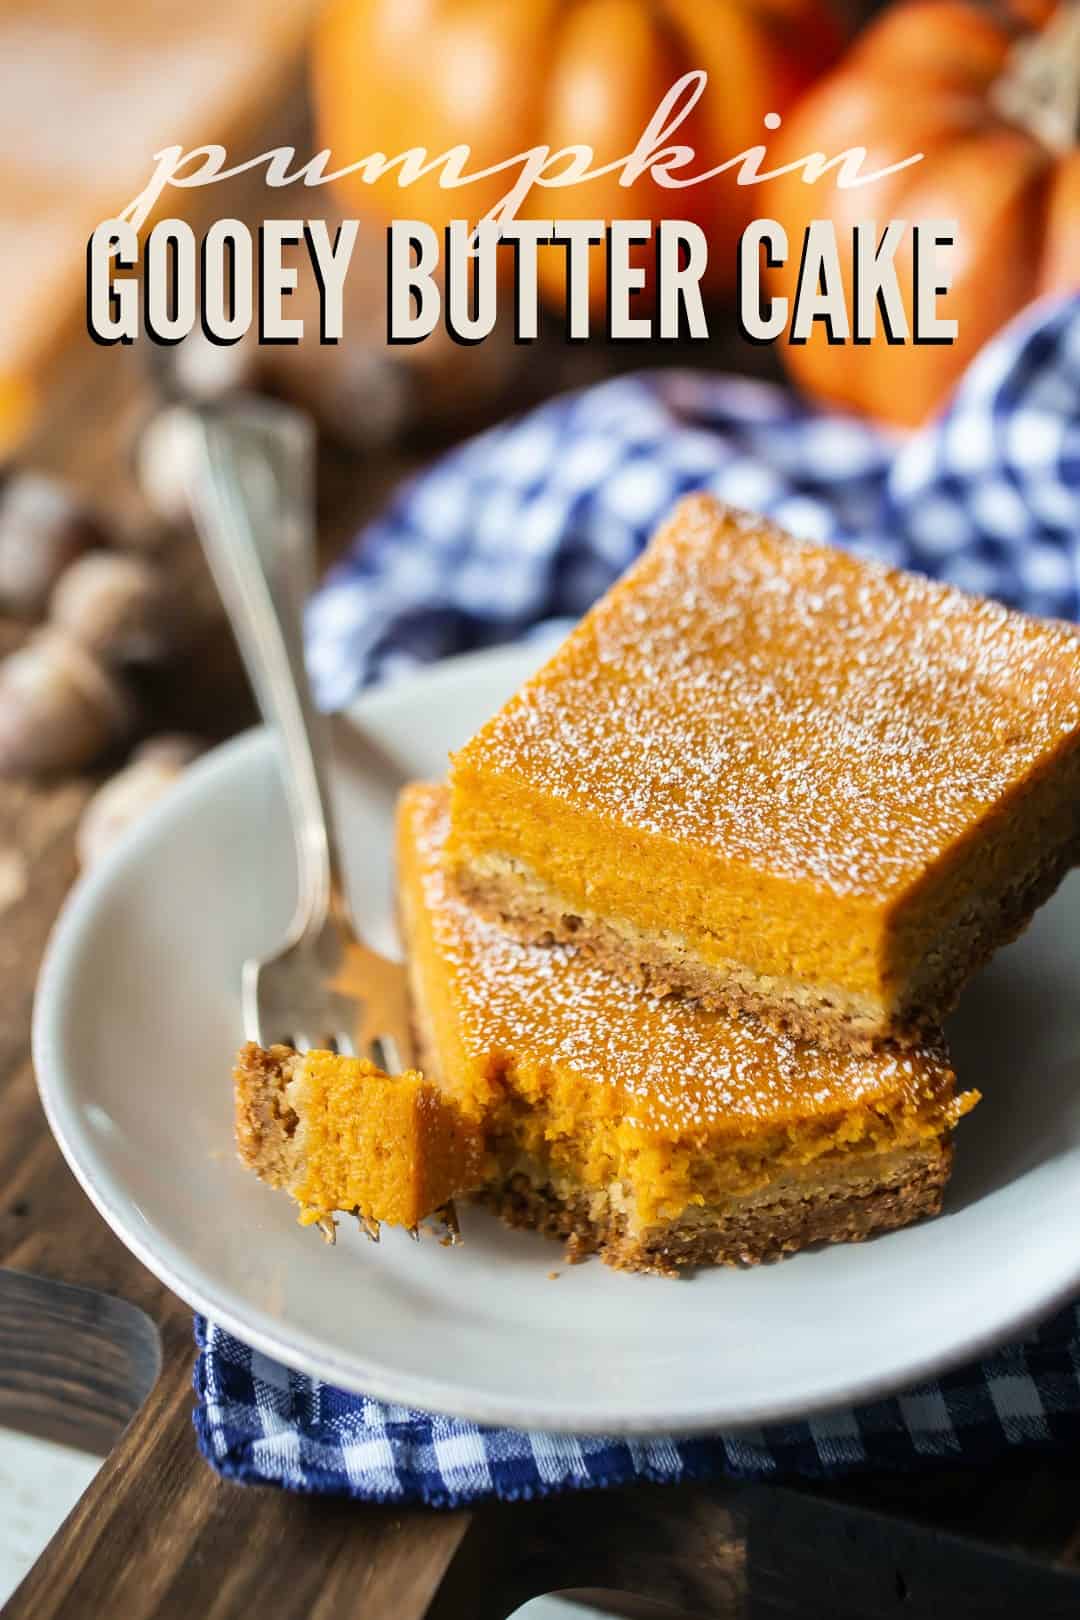 Pumpkin gooey cake bars on a white plate with a blue checked napkin and a text overlay above that reads "Pumpkin Gooey Butter Cake."